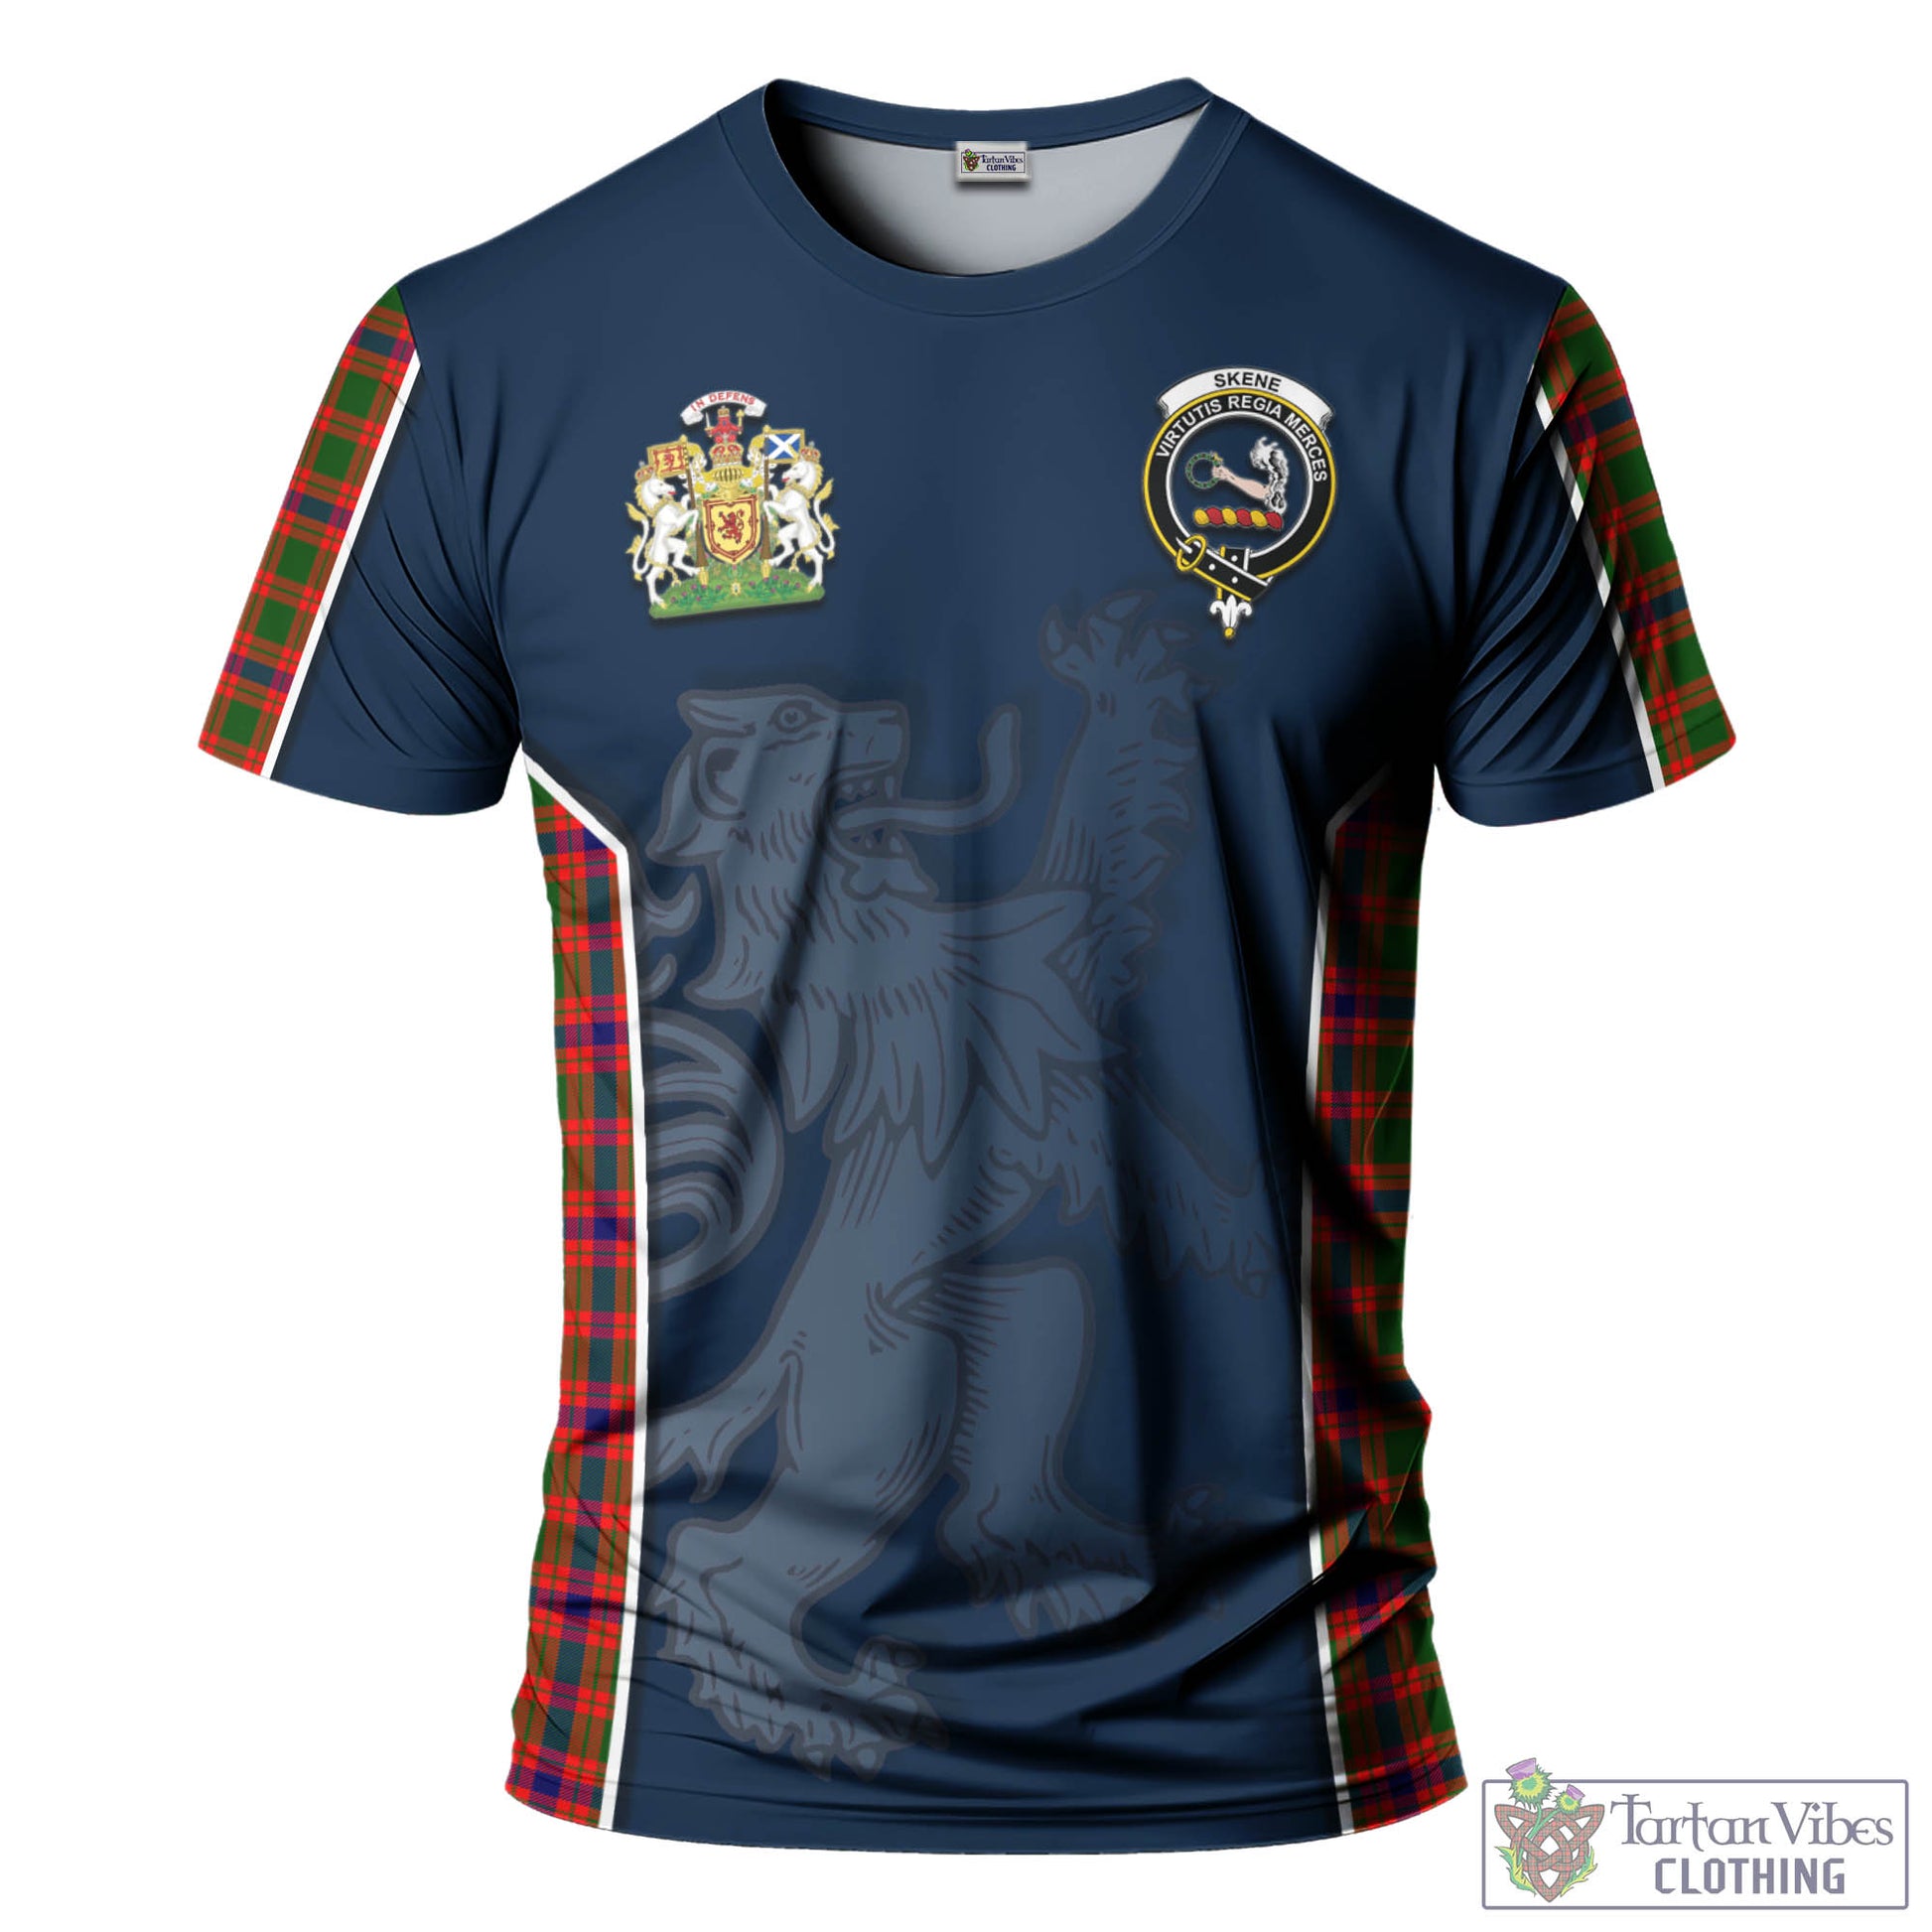 Tartan Vibes Clothing Skene Modern Tartan T-Shirt with Family Crest and Lion Rampant Vibes Sport Style